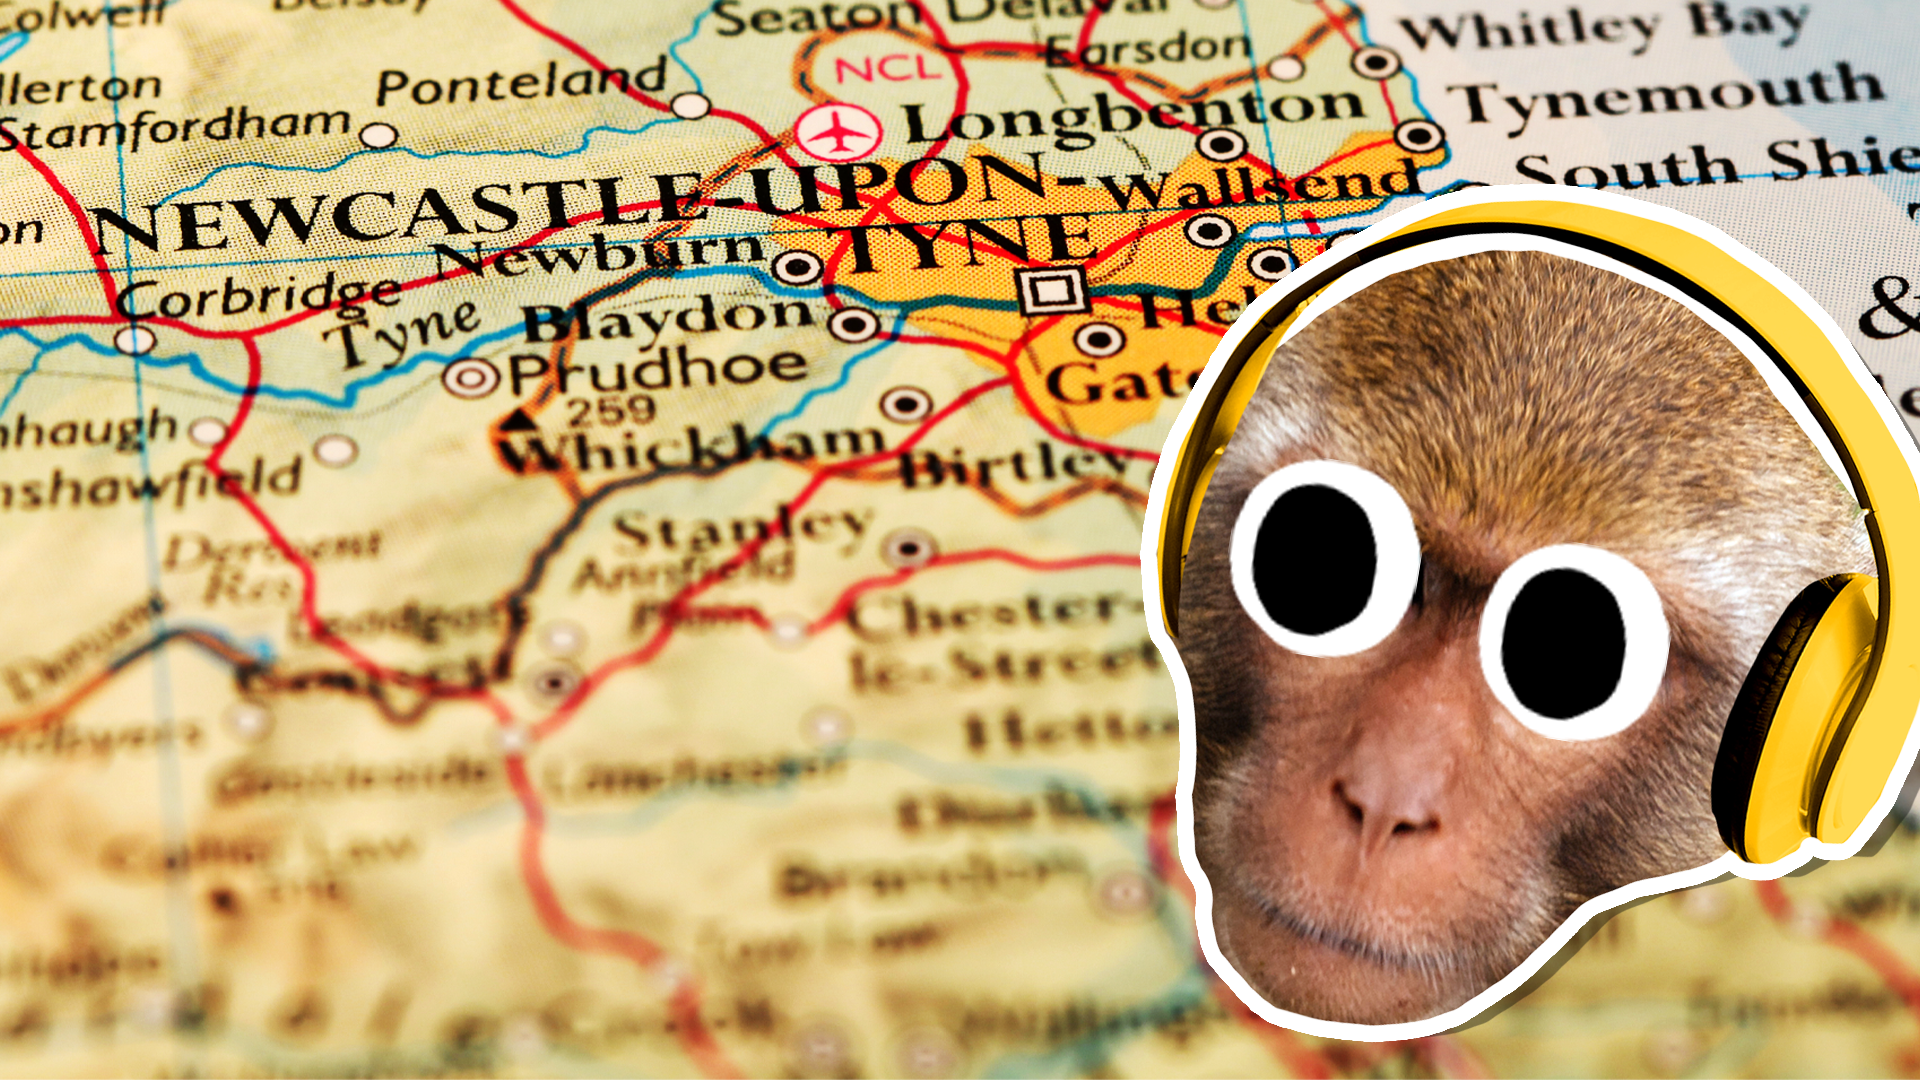 A monkey listening to music on a pair of headphones, with a map of the North East in the background